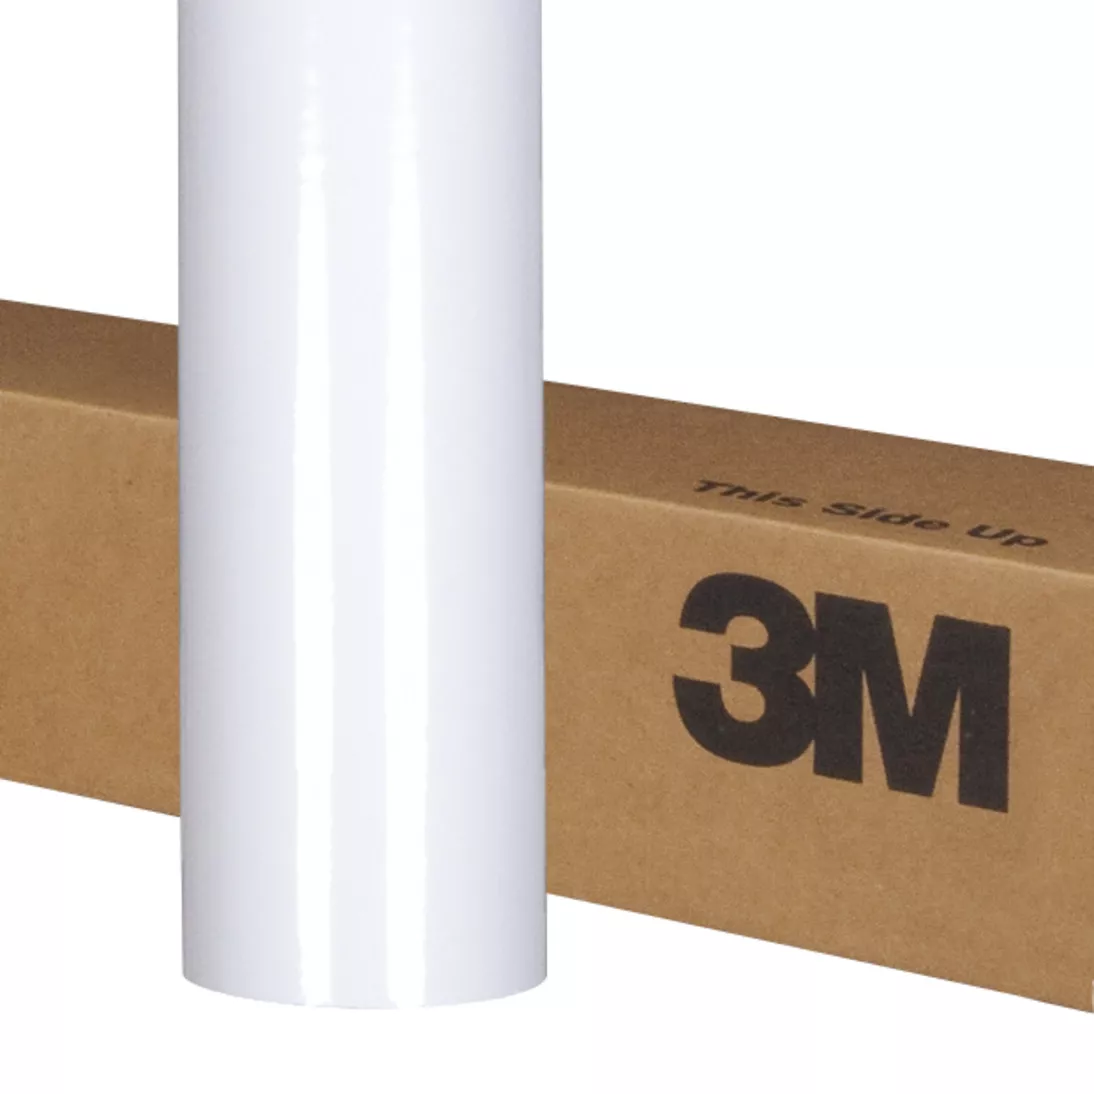 3M™ Press Printable Label Material IJ39-20, Soft White Vinyl, 54 in x 50 yd, 1 Roll/Case